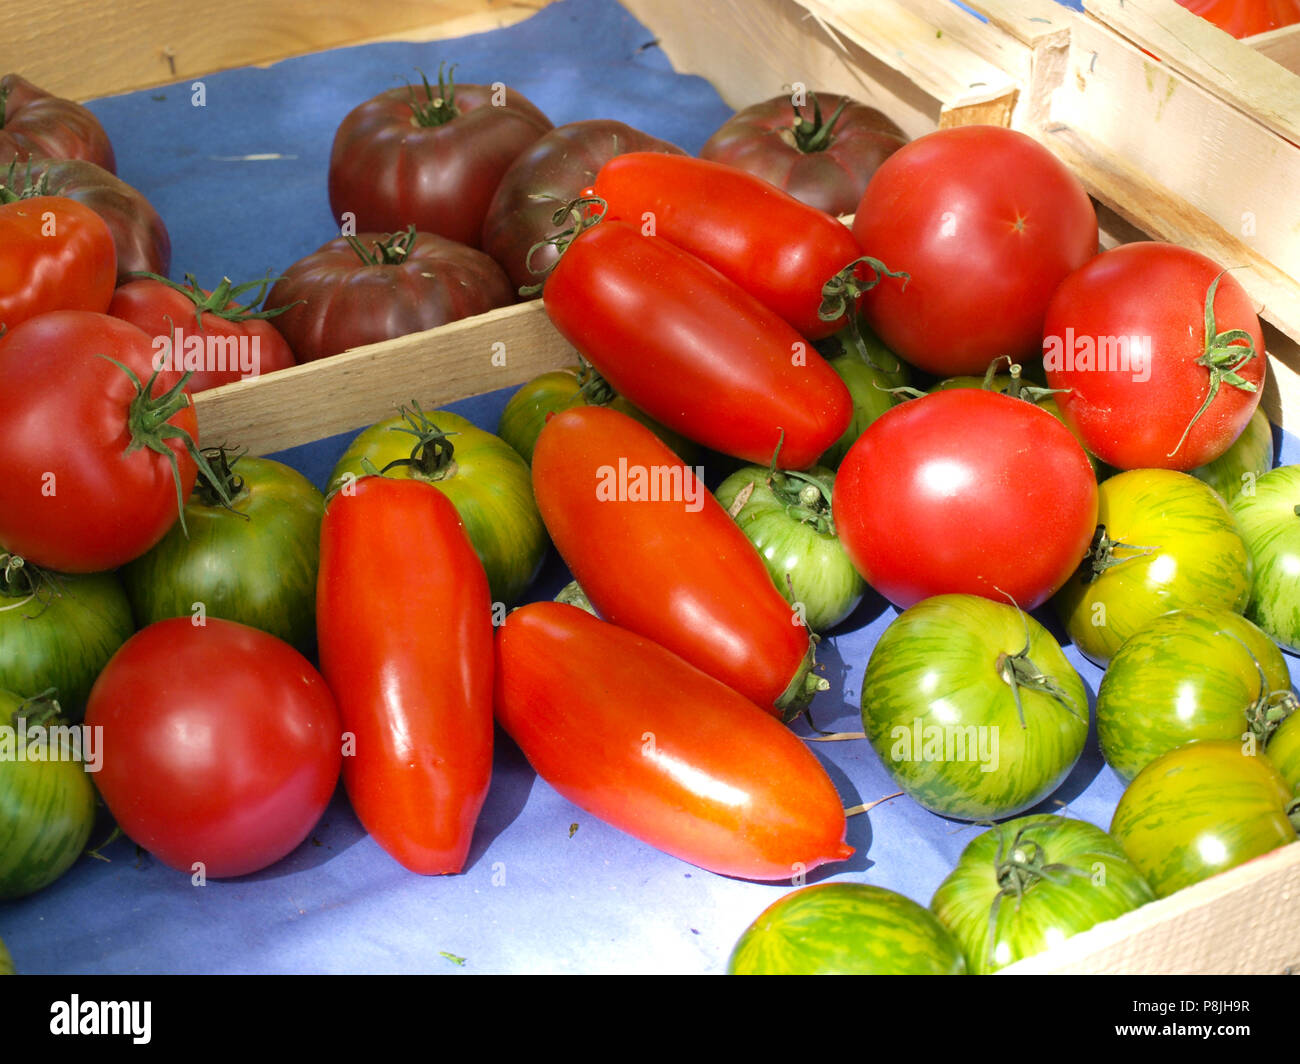 glossy red and green tomatoes Stock Photo